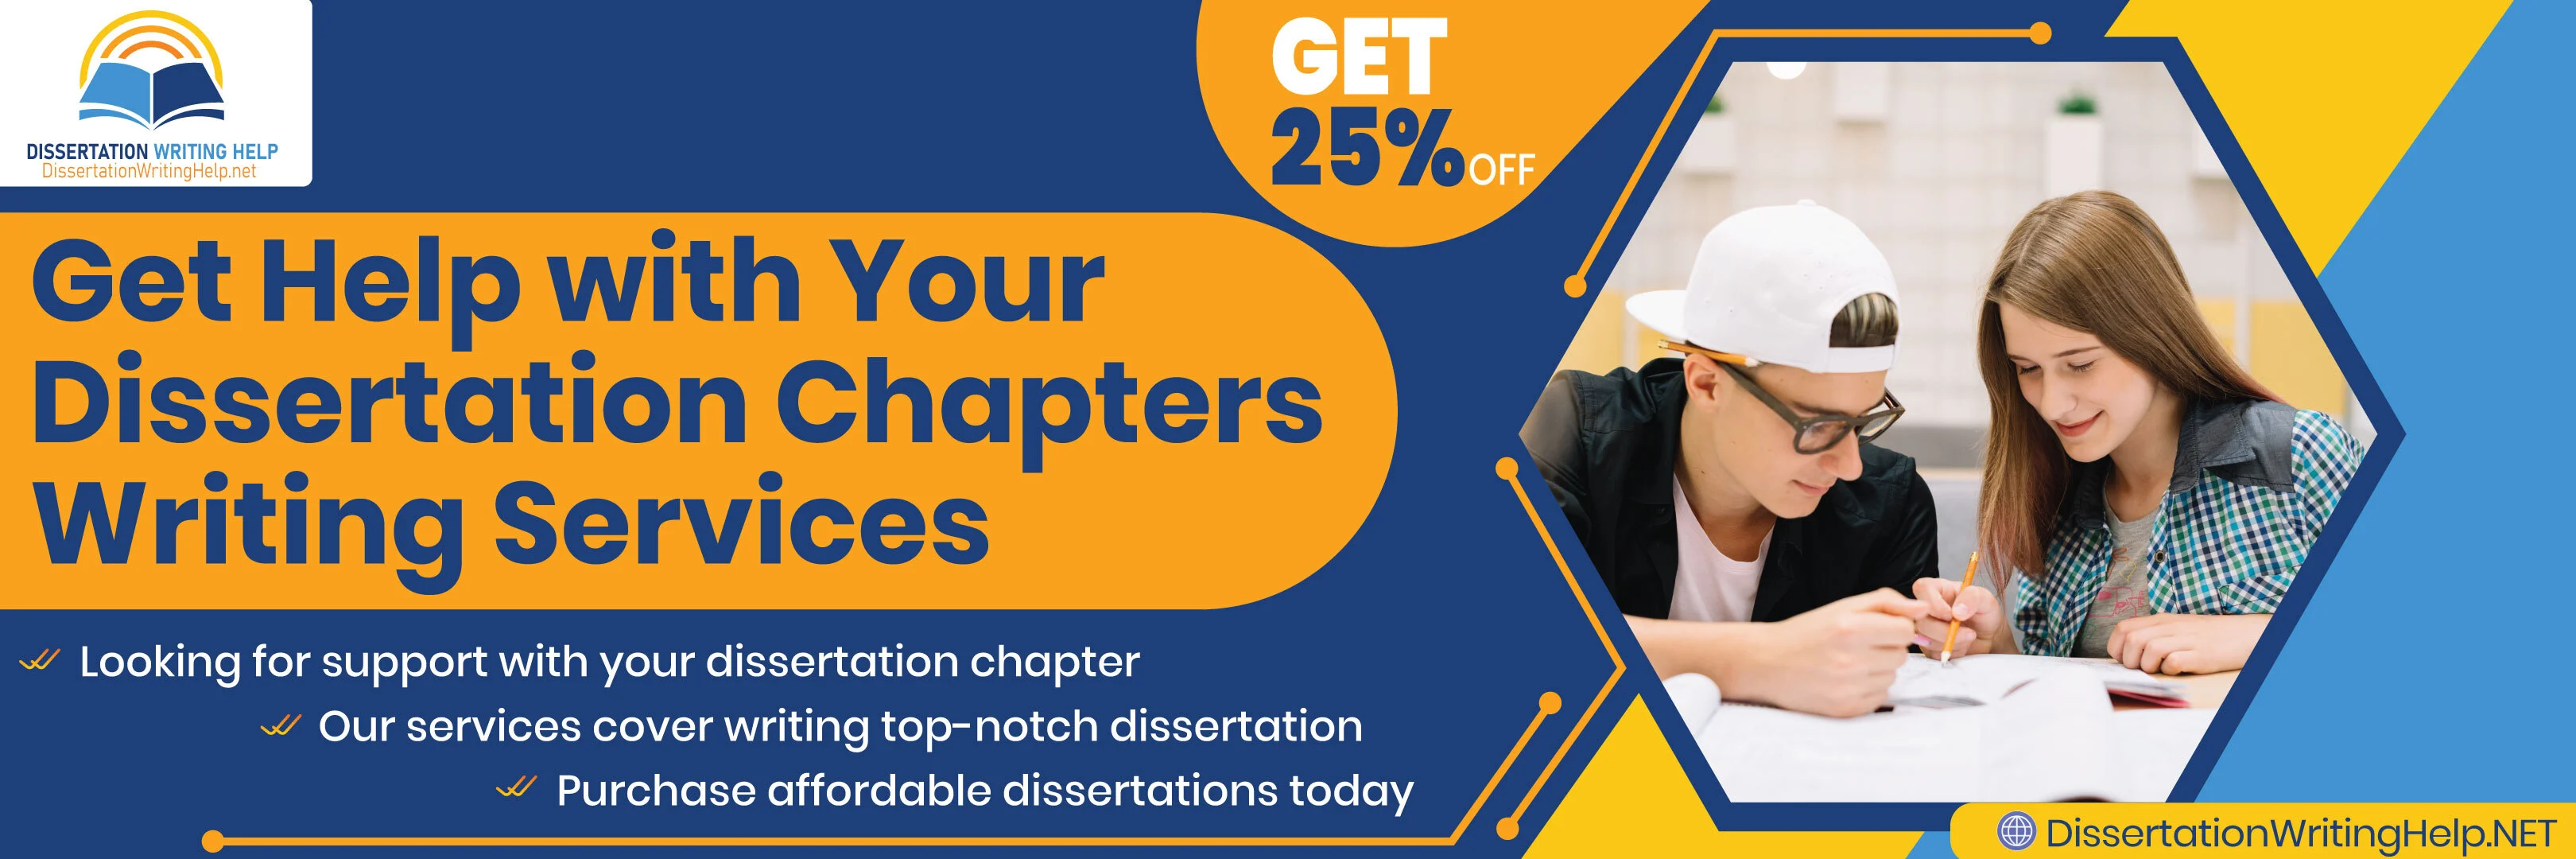 dissertation-chapter-writing-services